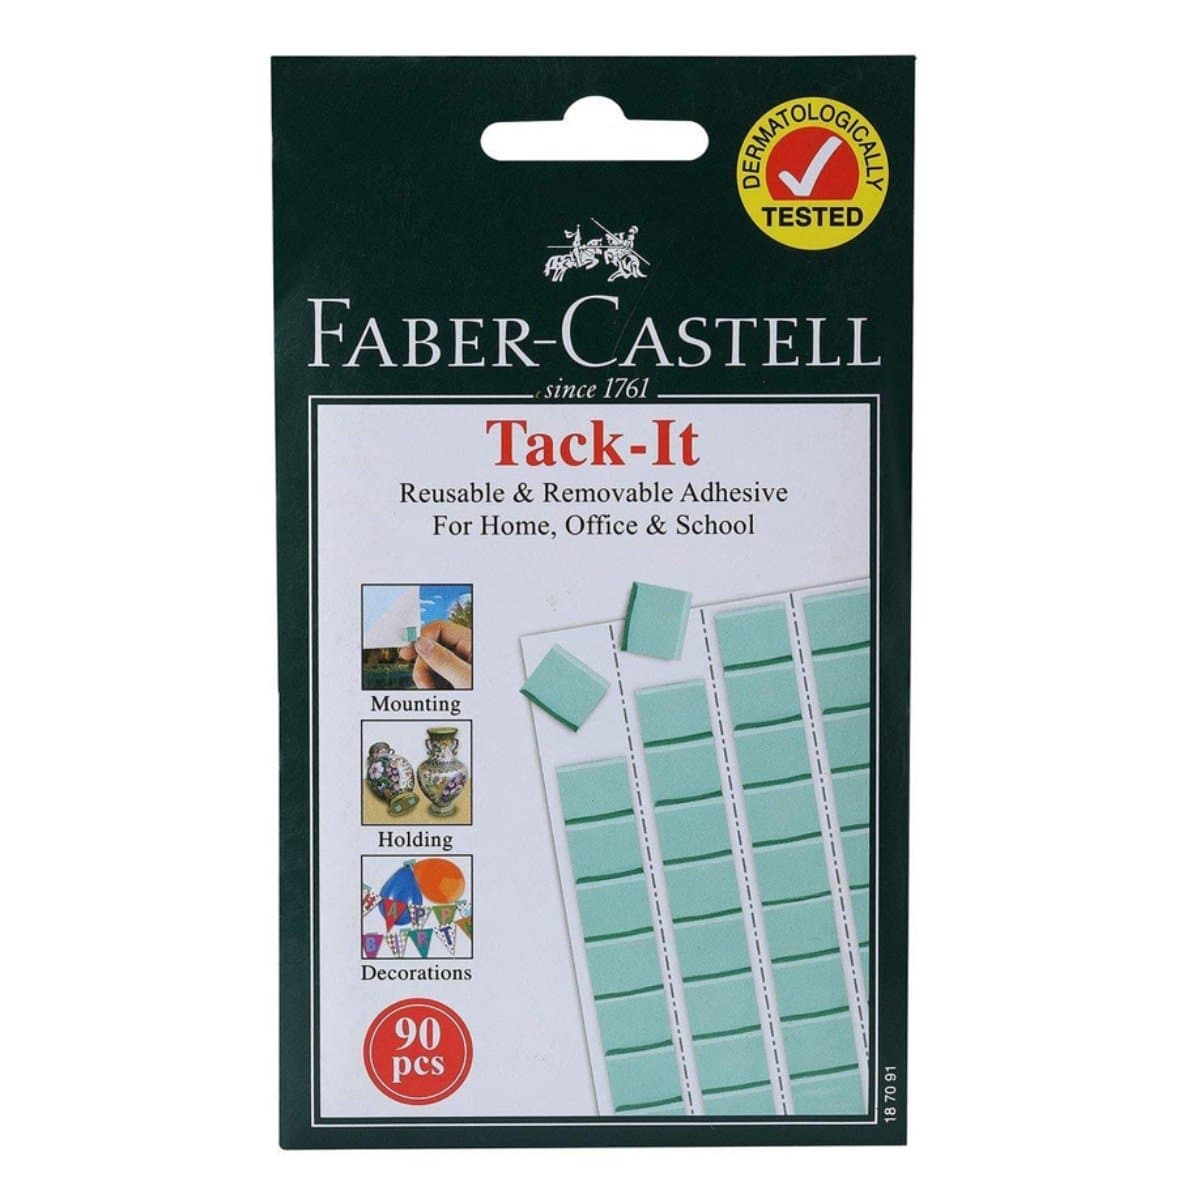 Faber Castell TACK-IT, Multipurpose Adhesive Tack, 90/pack